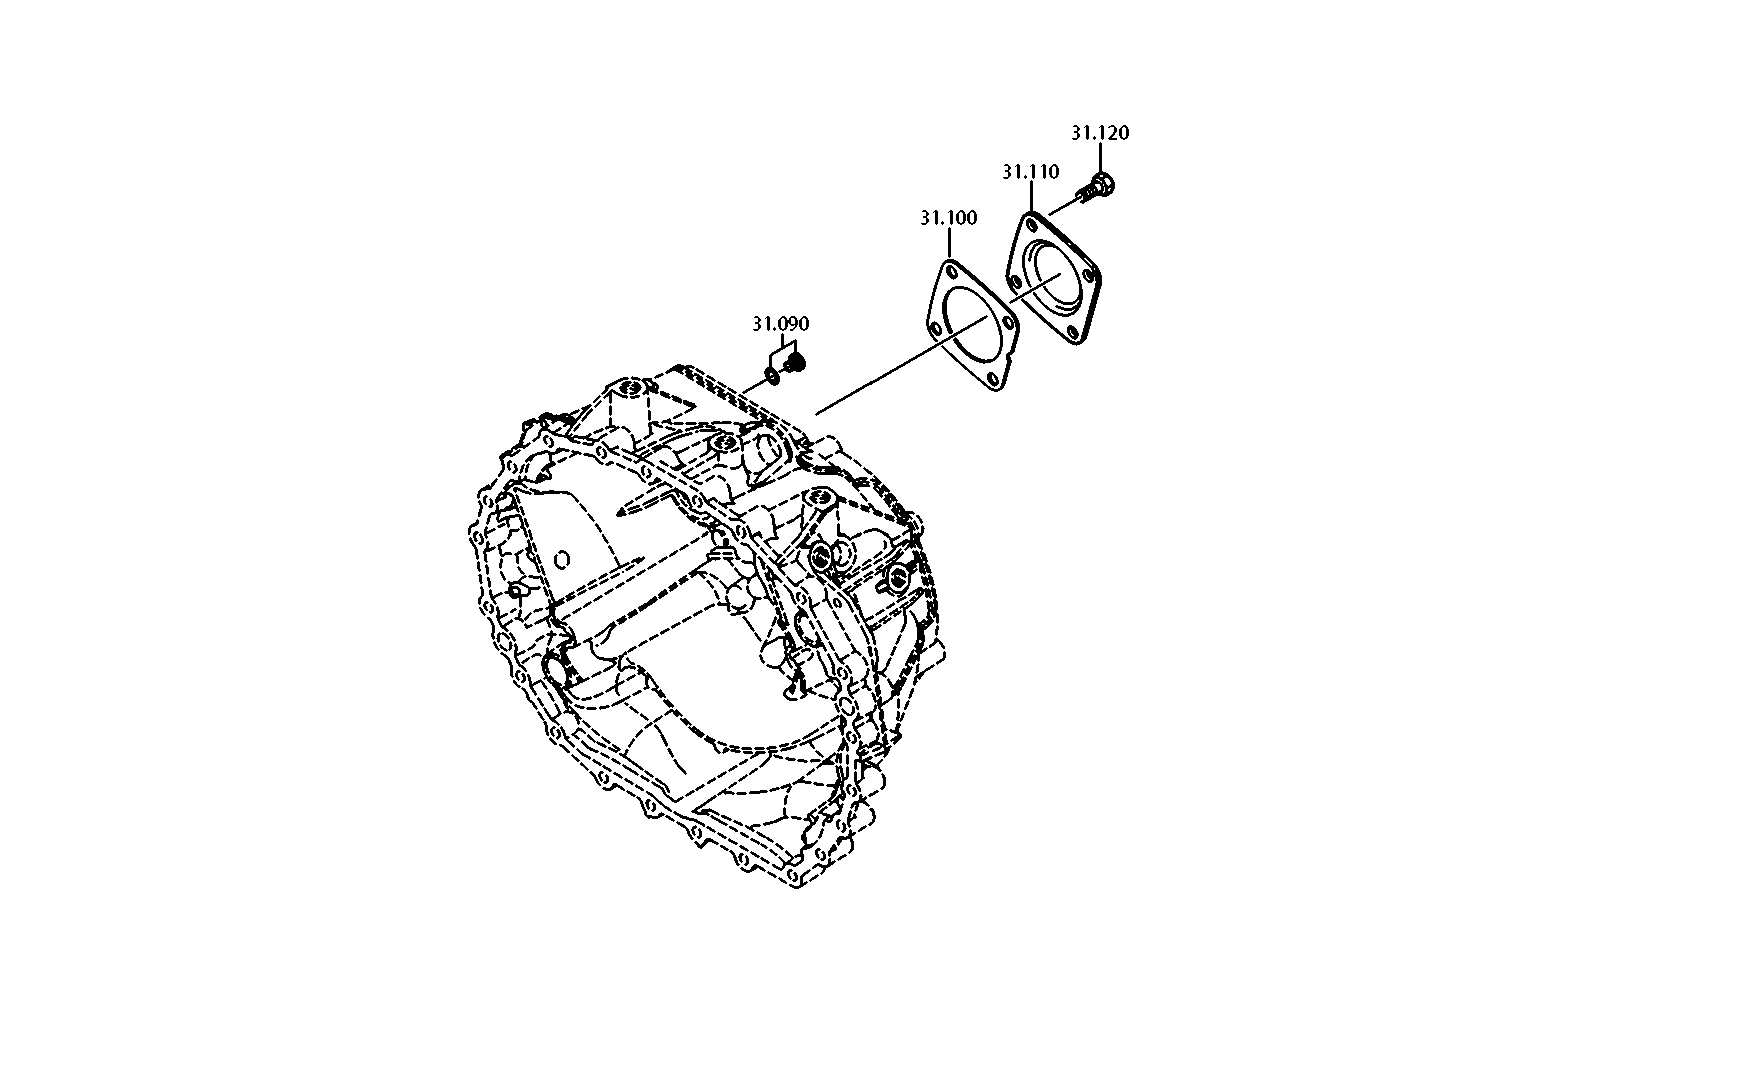 drawing for NAMS-SBYT 5001856357 - GASKET (figure 2)